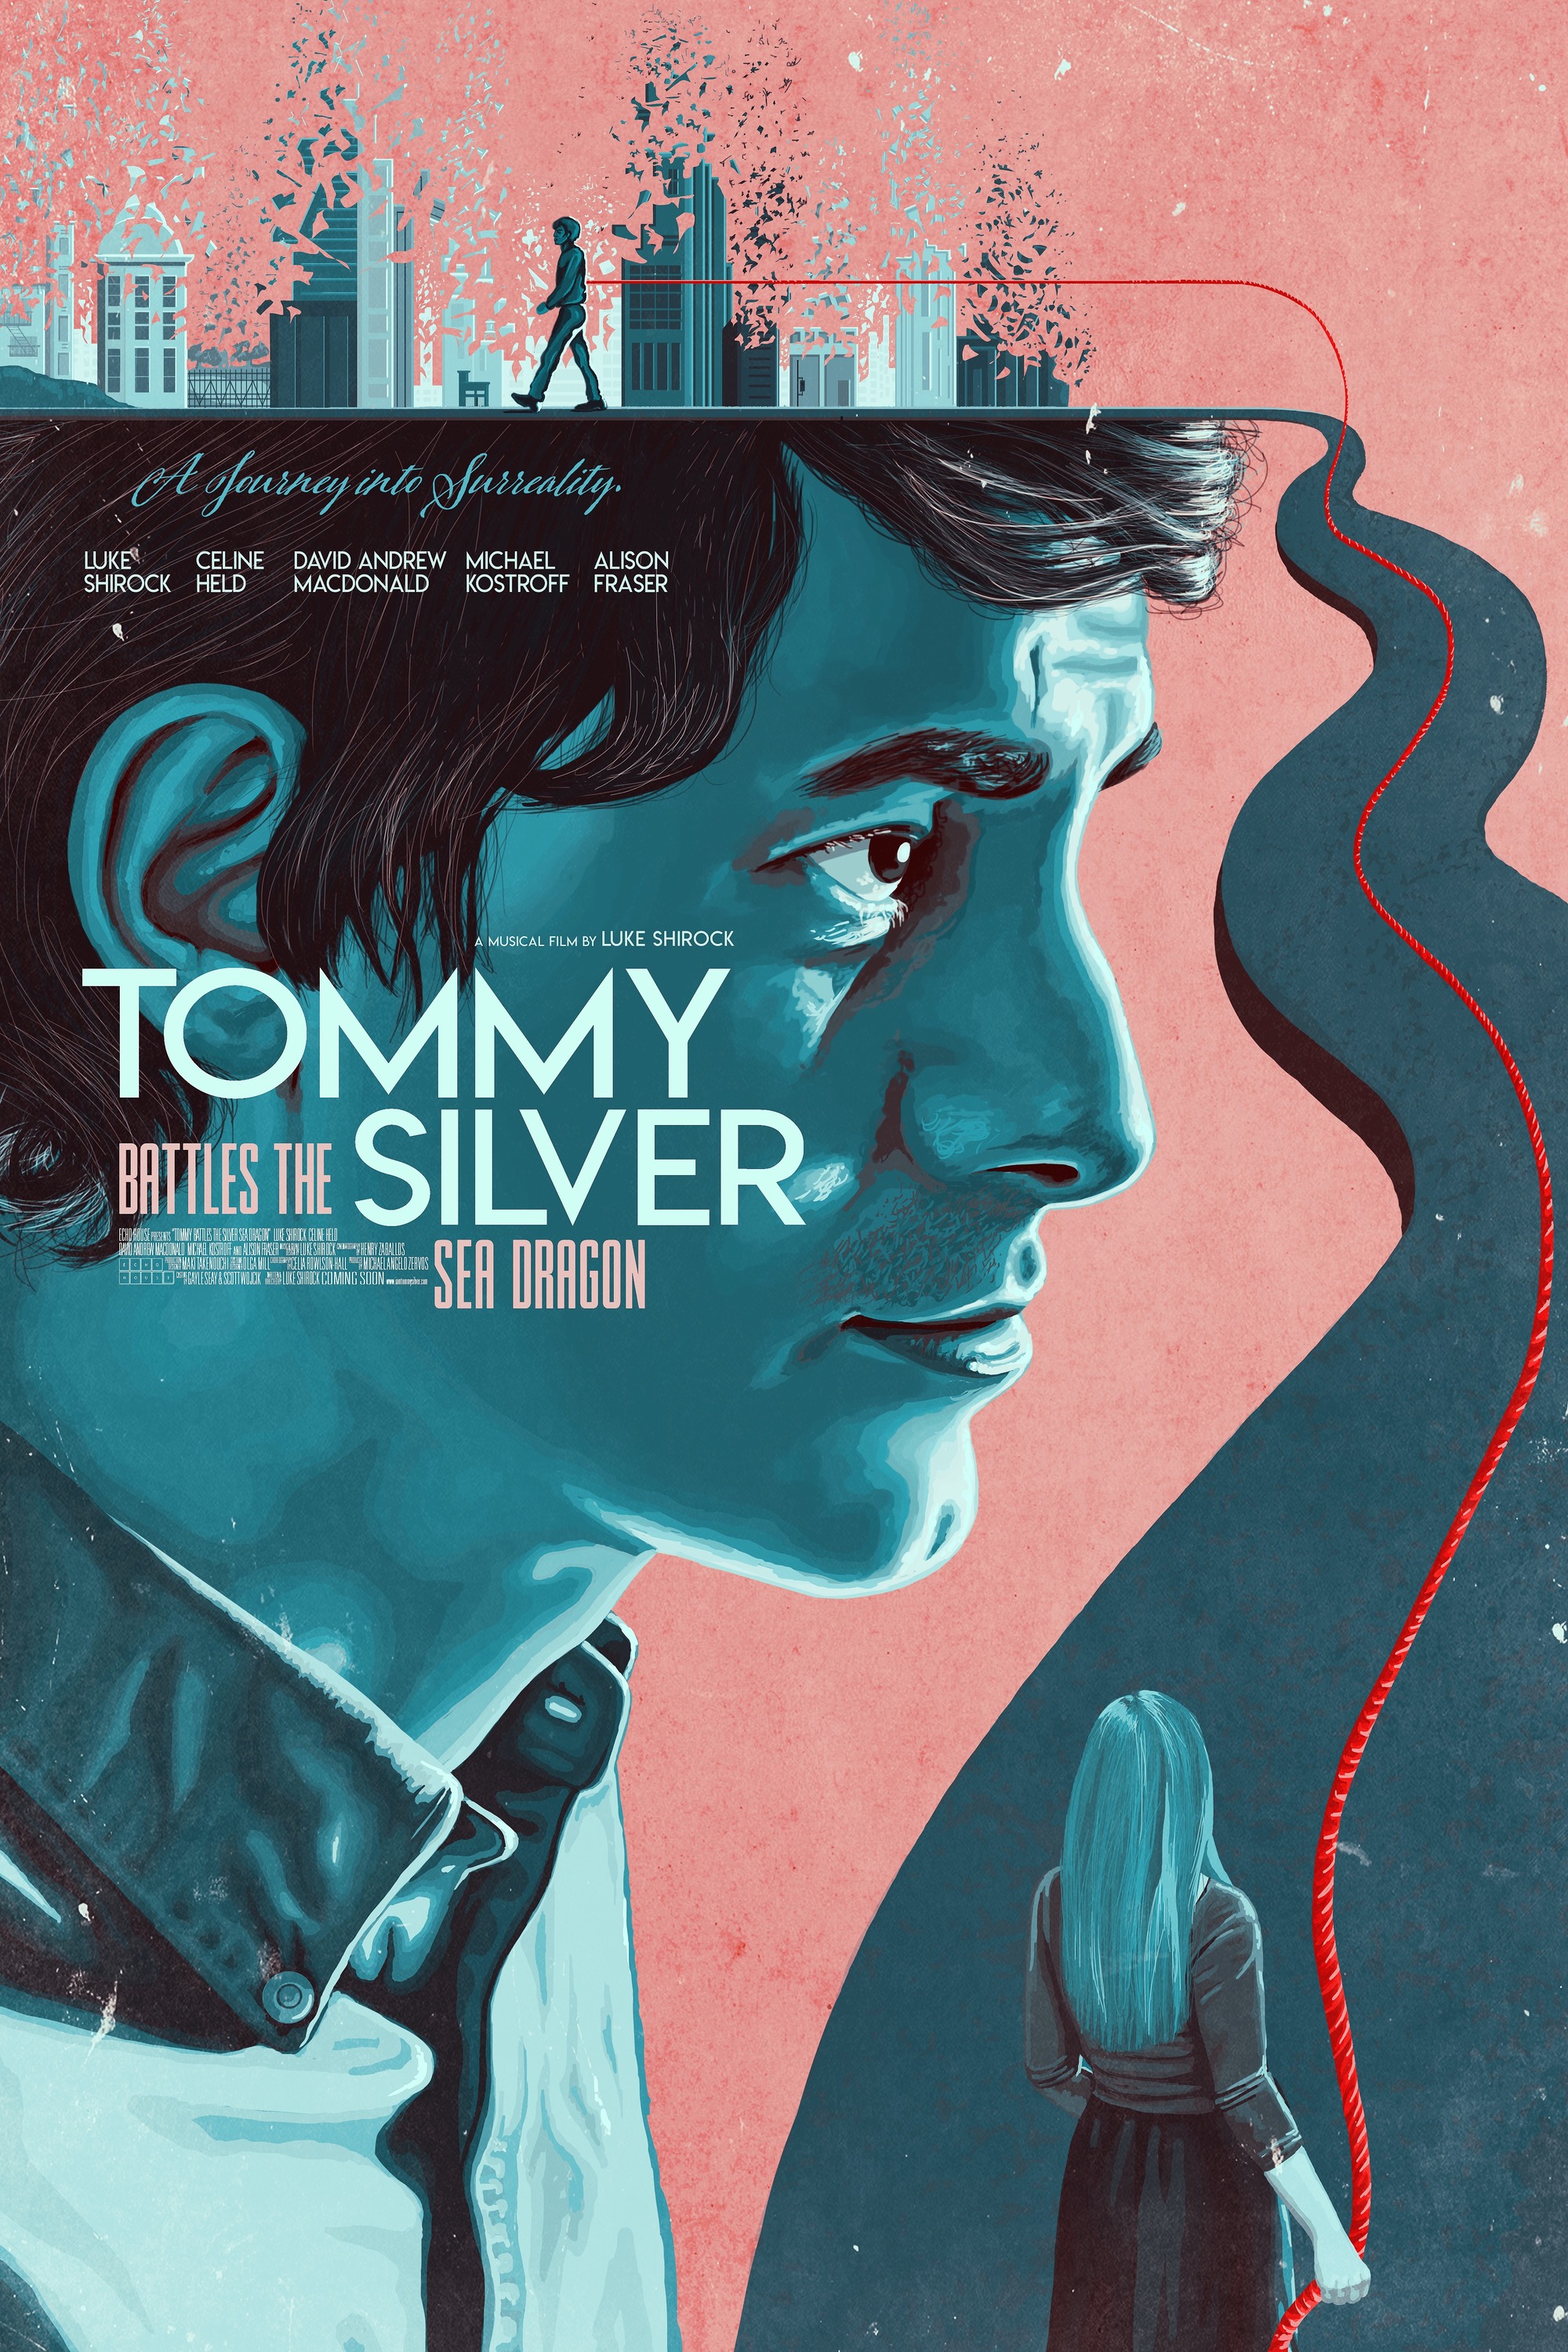 Mega Sized Movie Poster Image for Tommy Battles the Silver Sea Dragon 